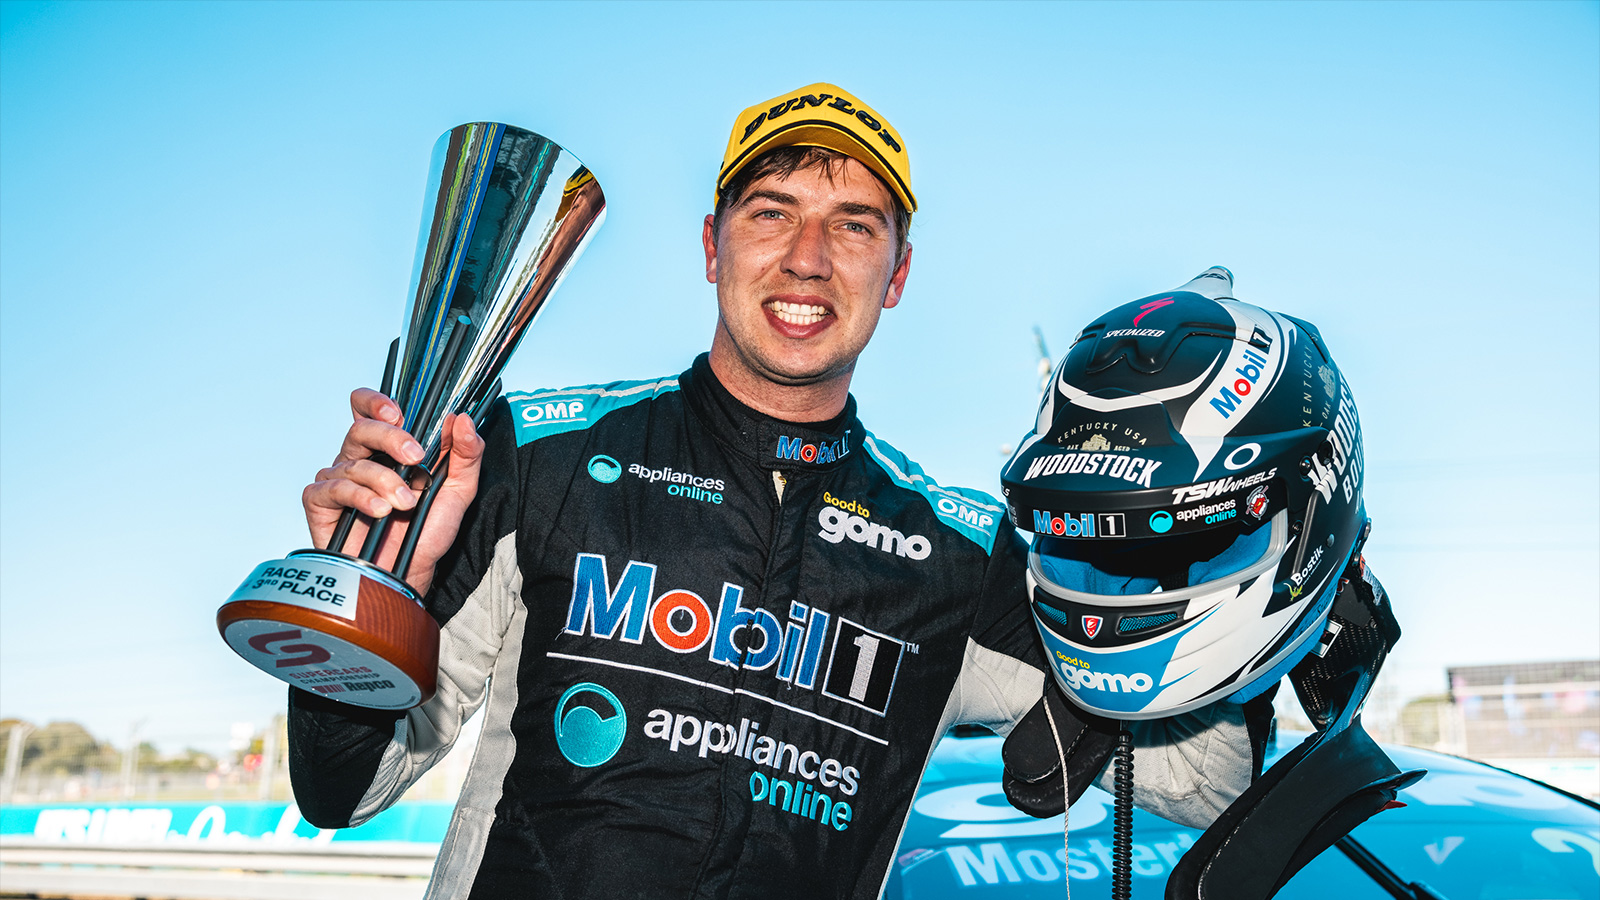 Mostert claimed two podiums over the weekend.